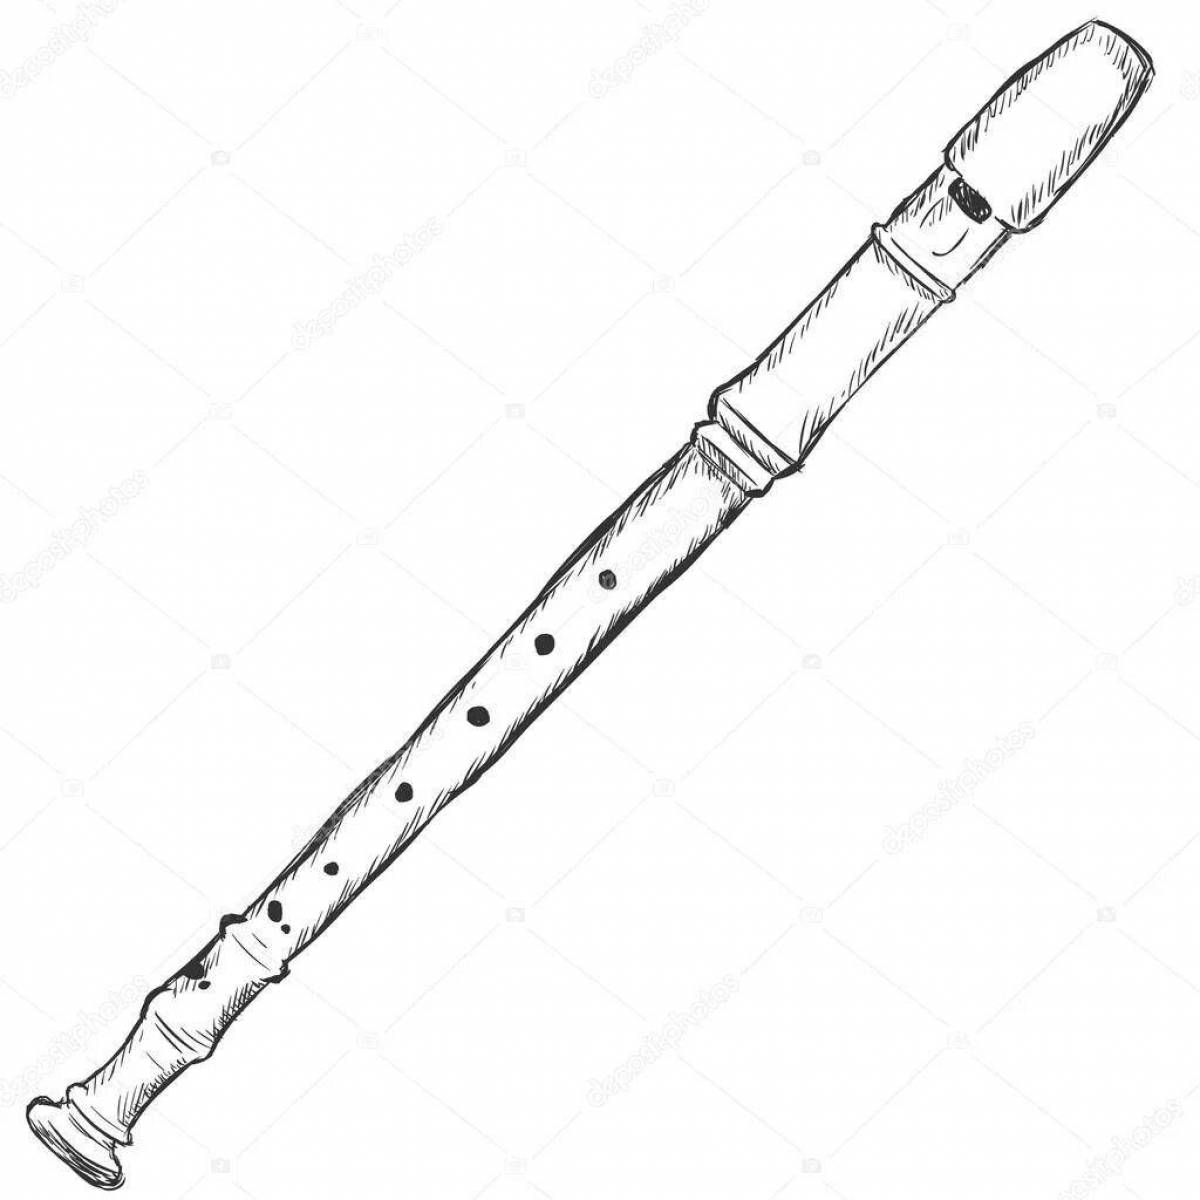 Adorable flute coloring book for kids